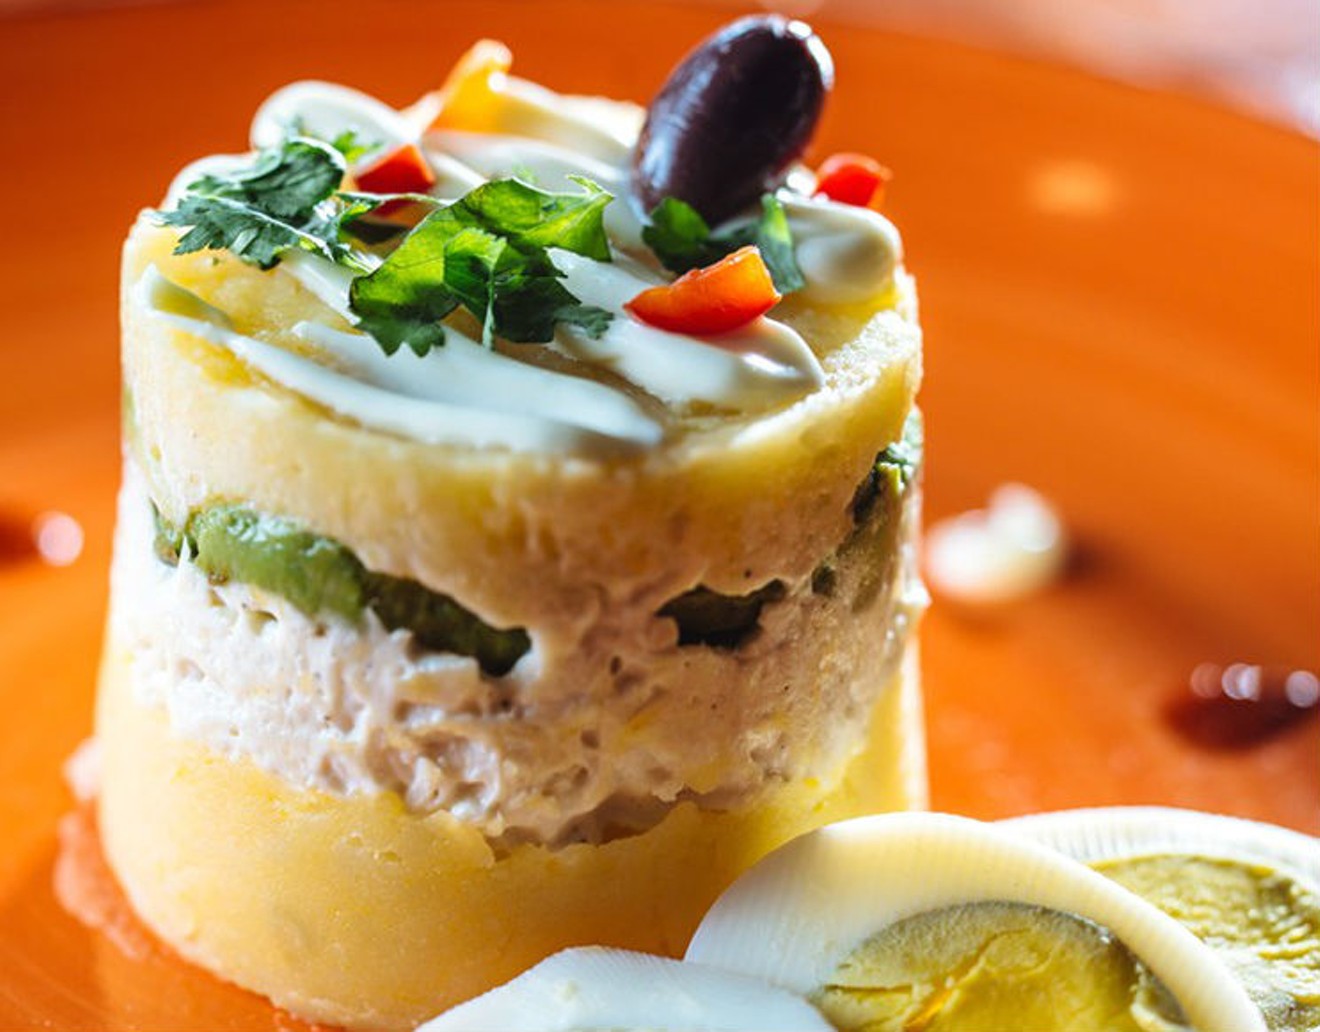 The causa limena at Lima Taverna, a new Peruvian restaurant in Plano, is a layered seafood and potato salad.